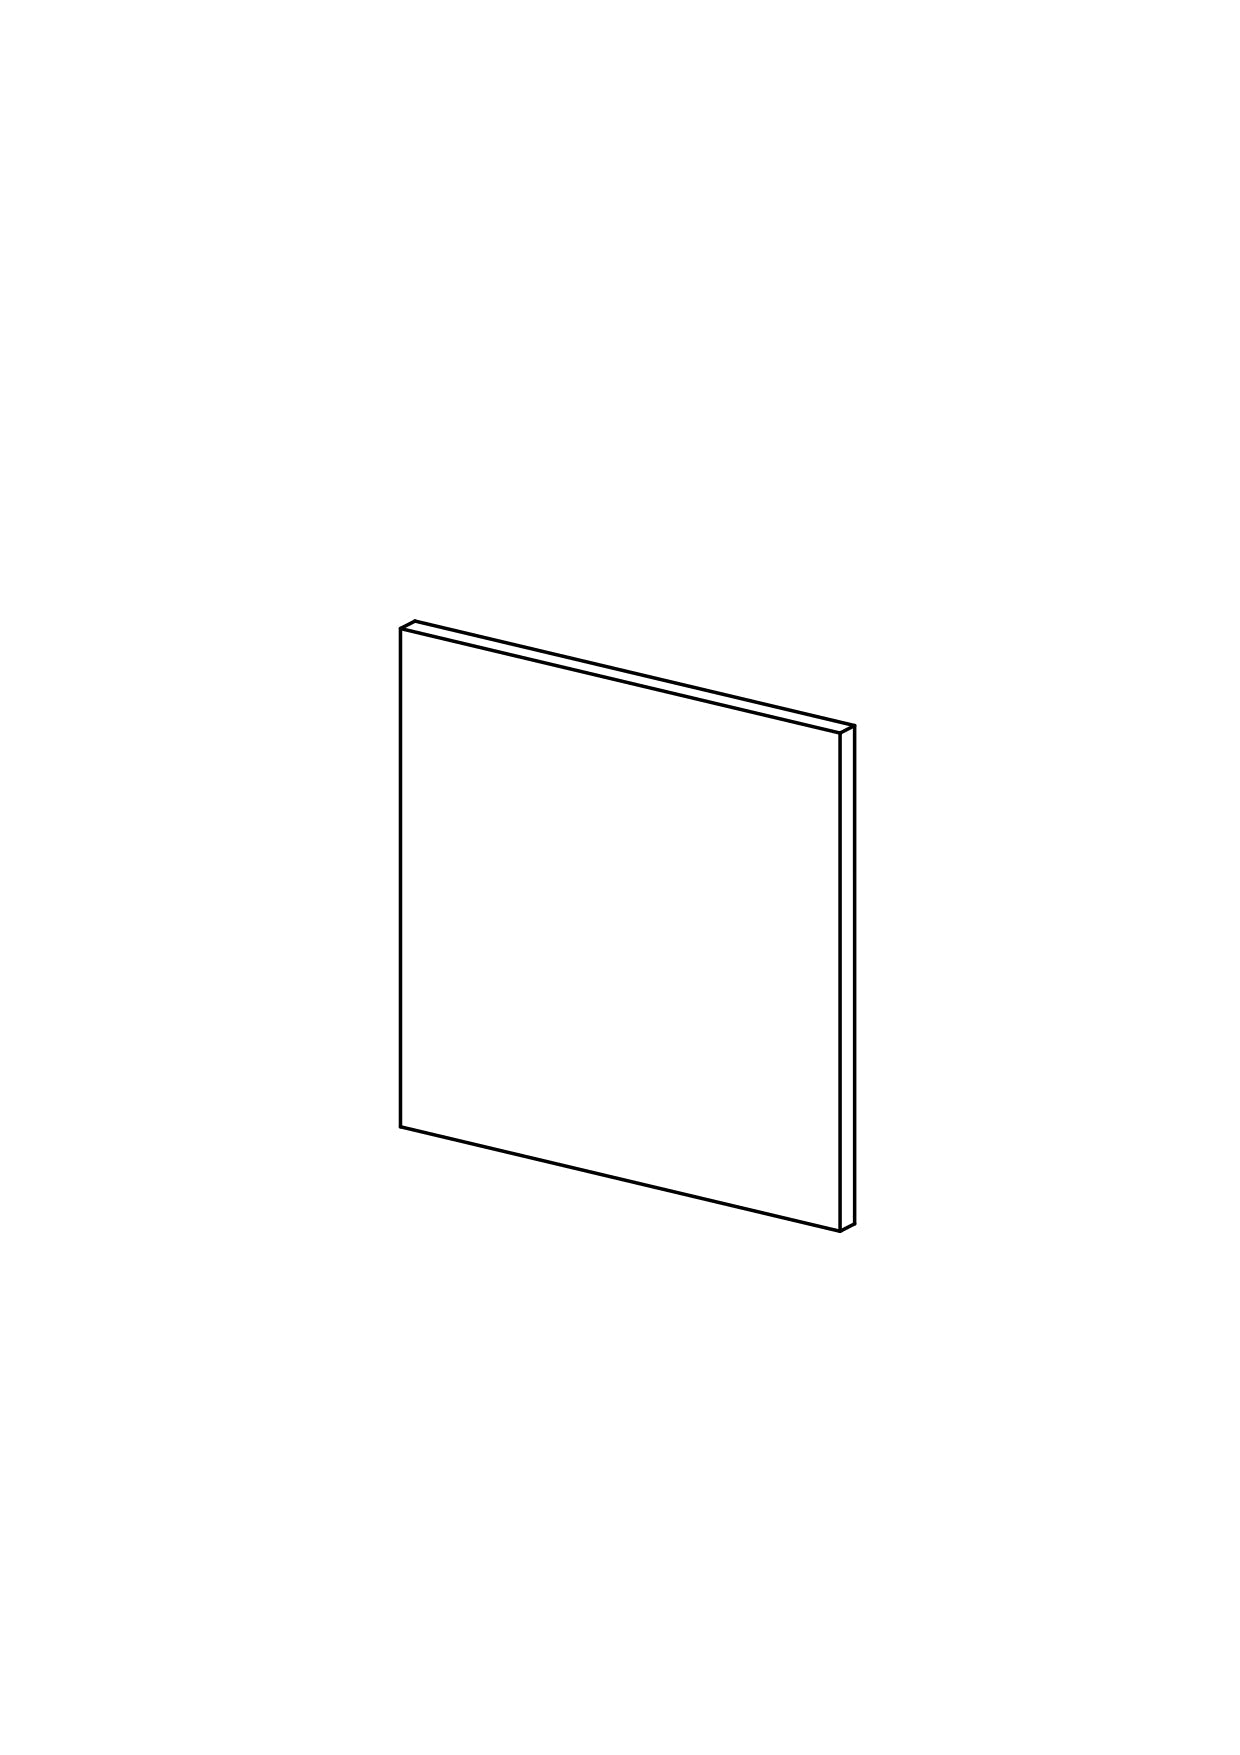 90x90 - Cover Panel -Plain - Unpainted (Raw) - METOD